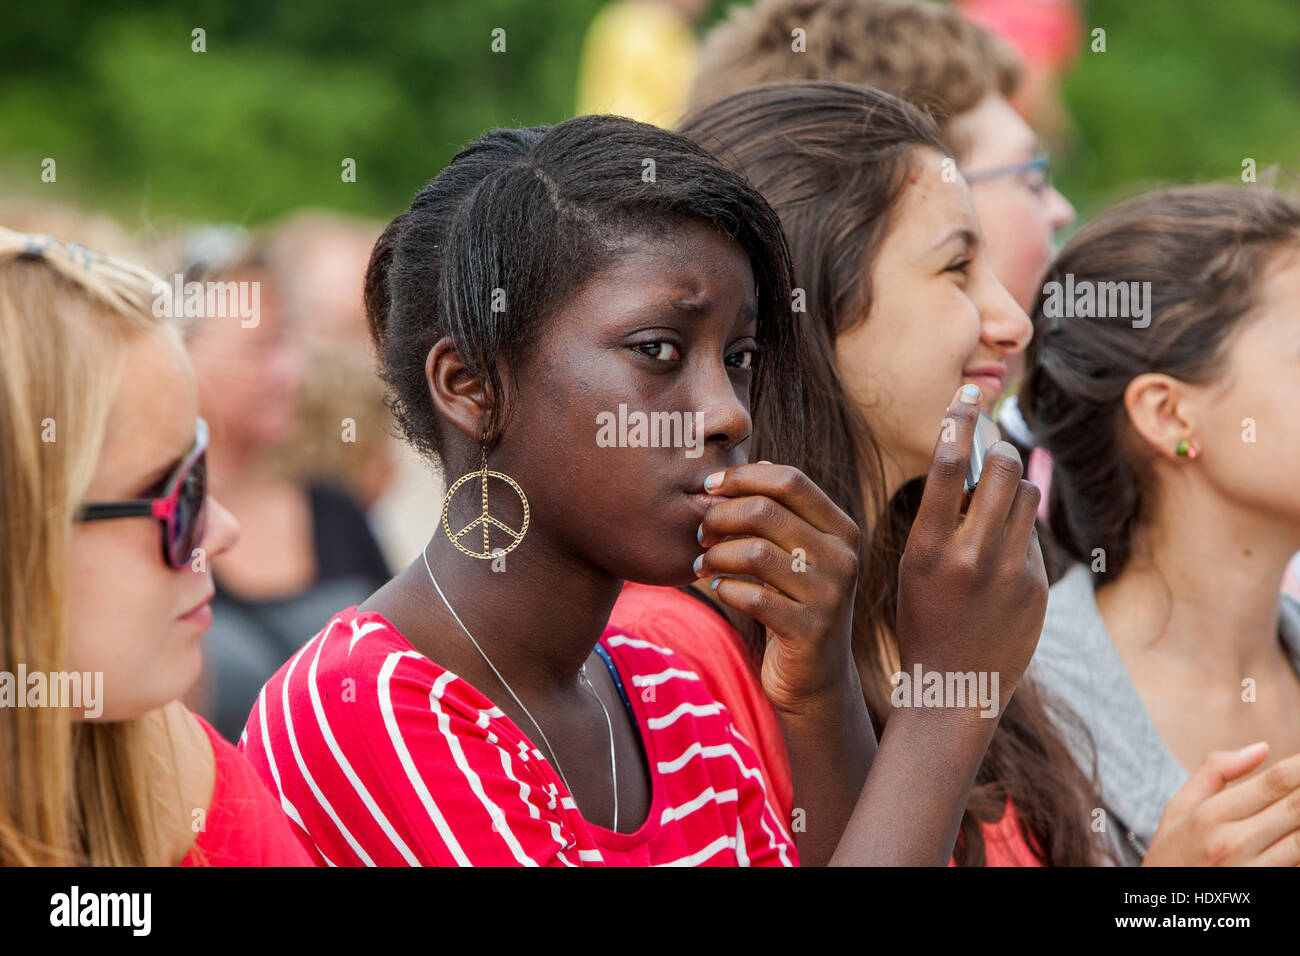 A girl with Peace mark earring. Stock Photo